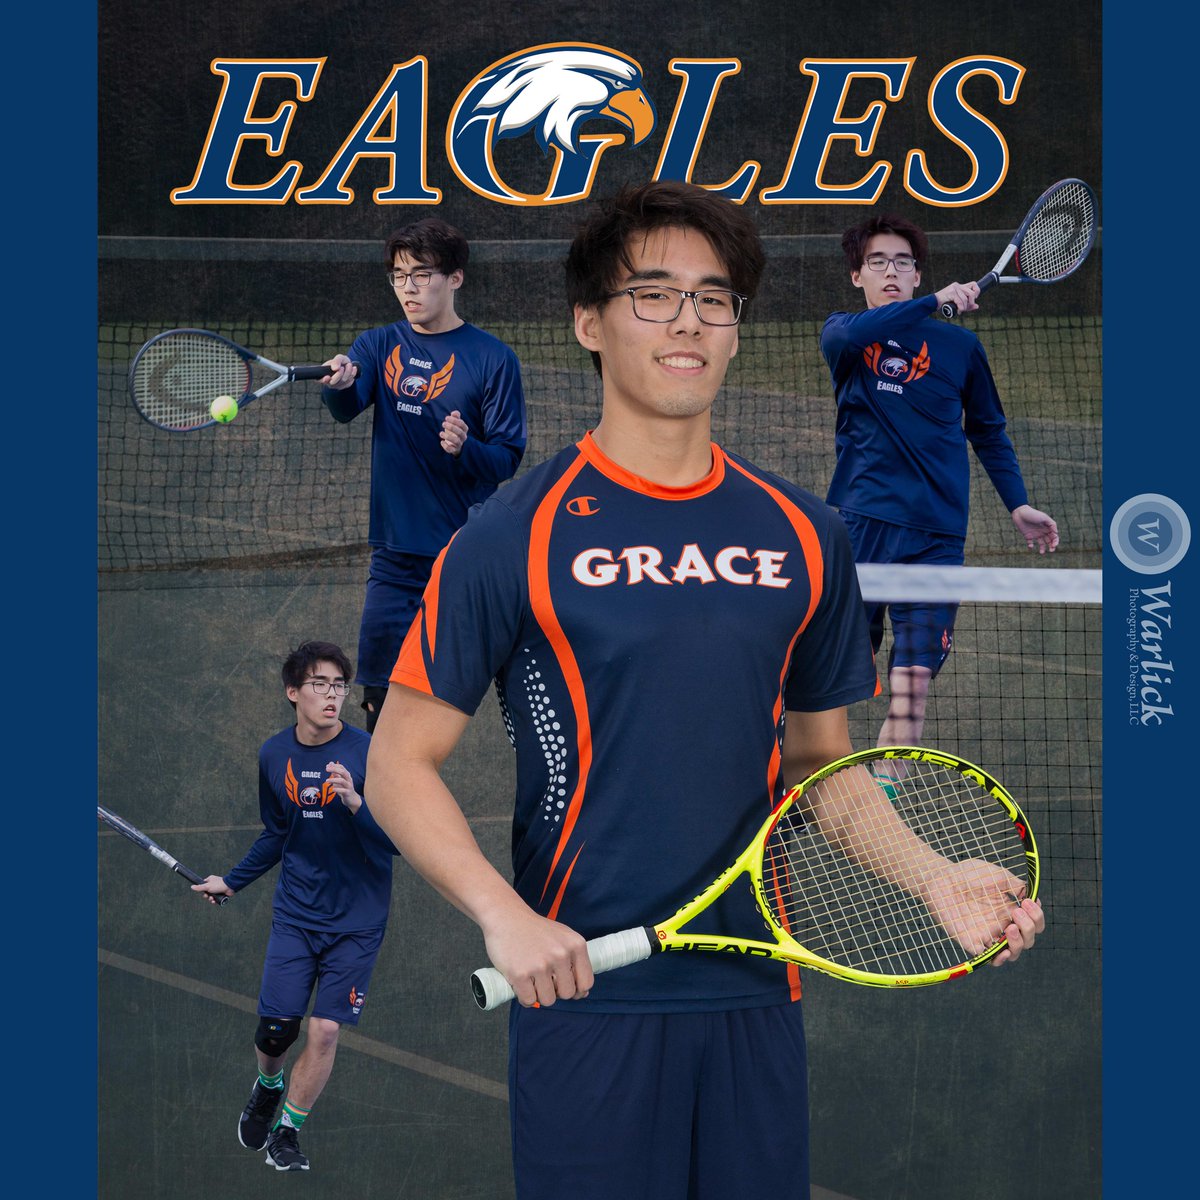 We love creating these sportraits for athletes! #tennis #sports #athlete #tennispicture #sportsportrait #ncphotographer #ncsportsphotographer #raleighncphotographer #ncschoolphotographer #tennisphoto #sportsphoto #sportsphotographer